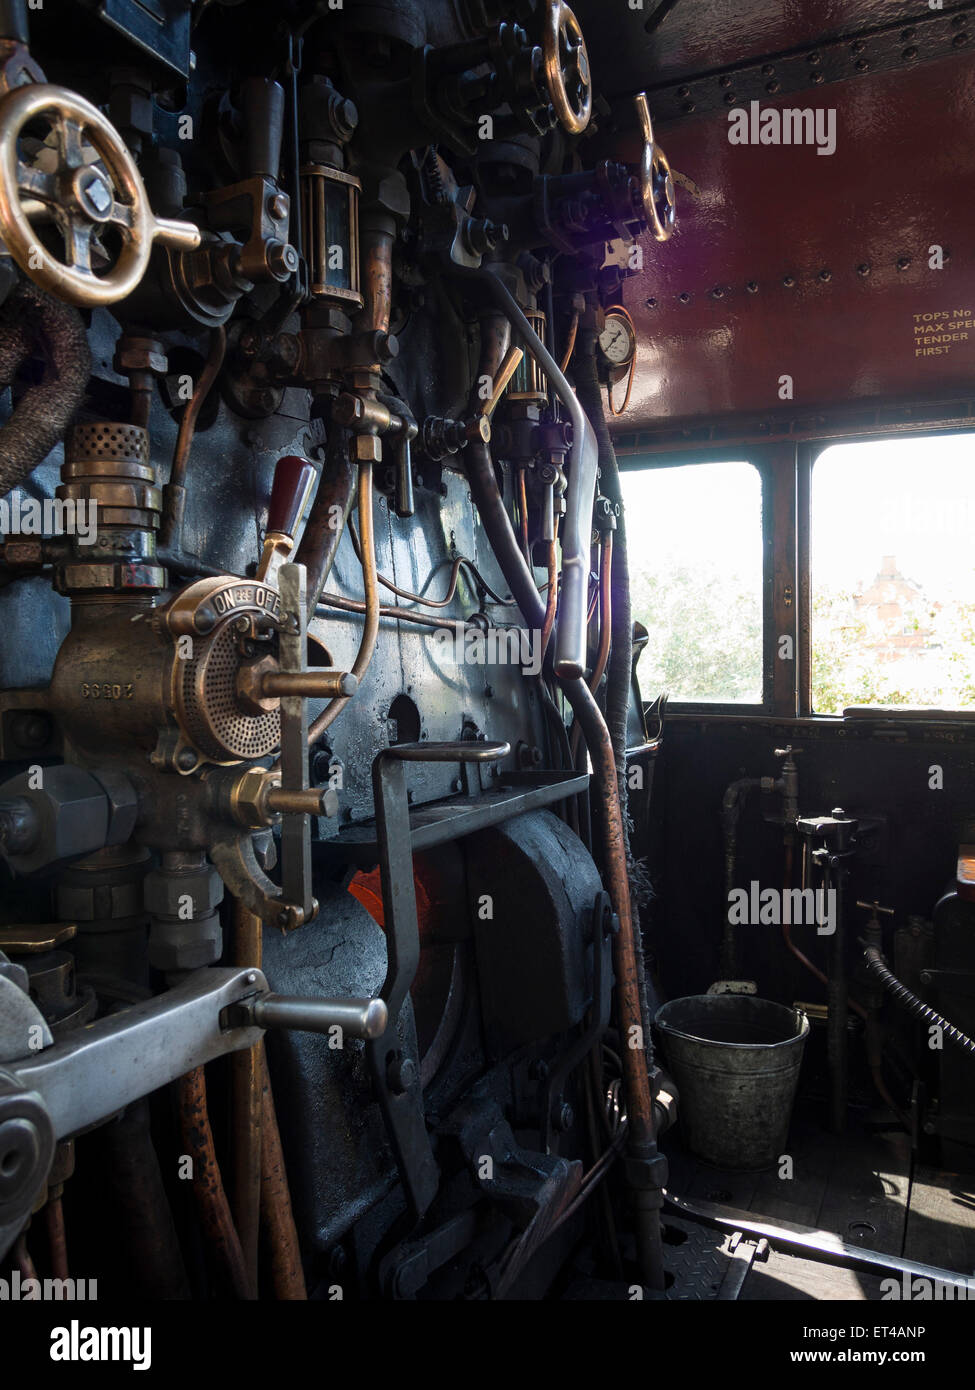 controls of a vintage steam locomotive at Loughborough station, on the Great Central Railway in Leicestershire,UK Stock Photo